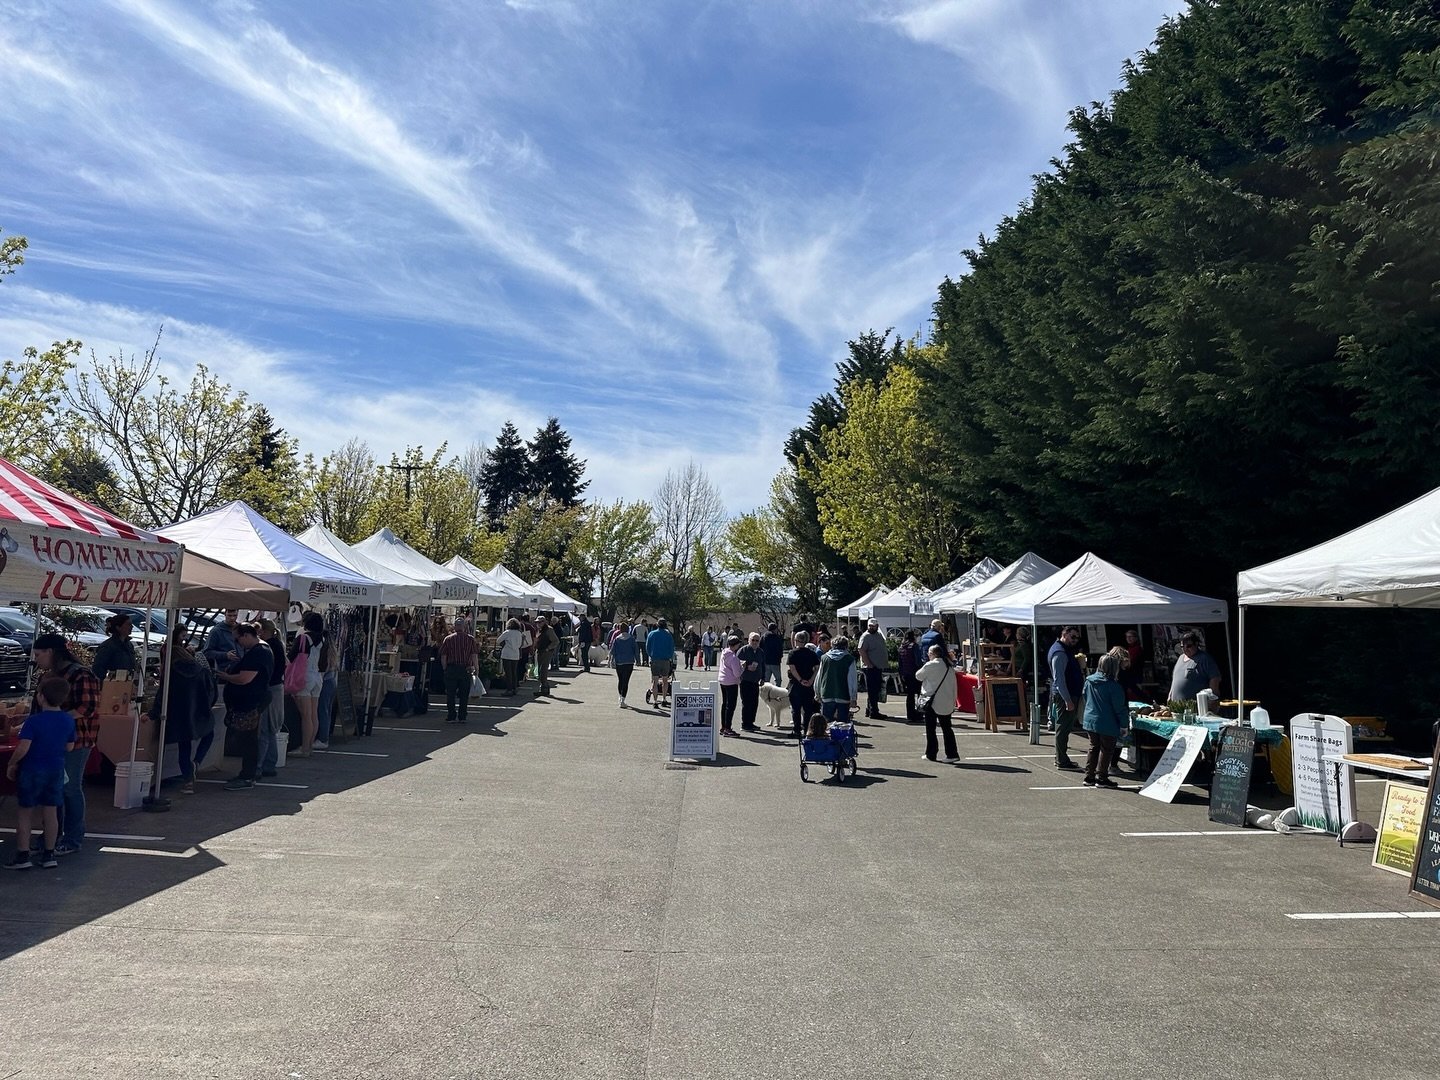 Less than 24 hours til our favorite day of the week - market day!!

This Saturday, April 20th, we&rsquo;ve got a full market: with a variety of farmers, hot food vendors, local food processors, artisans and more. The Master Gardeners will be debunkin